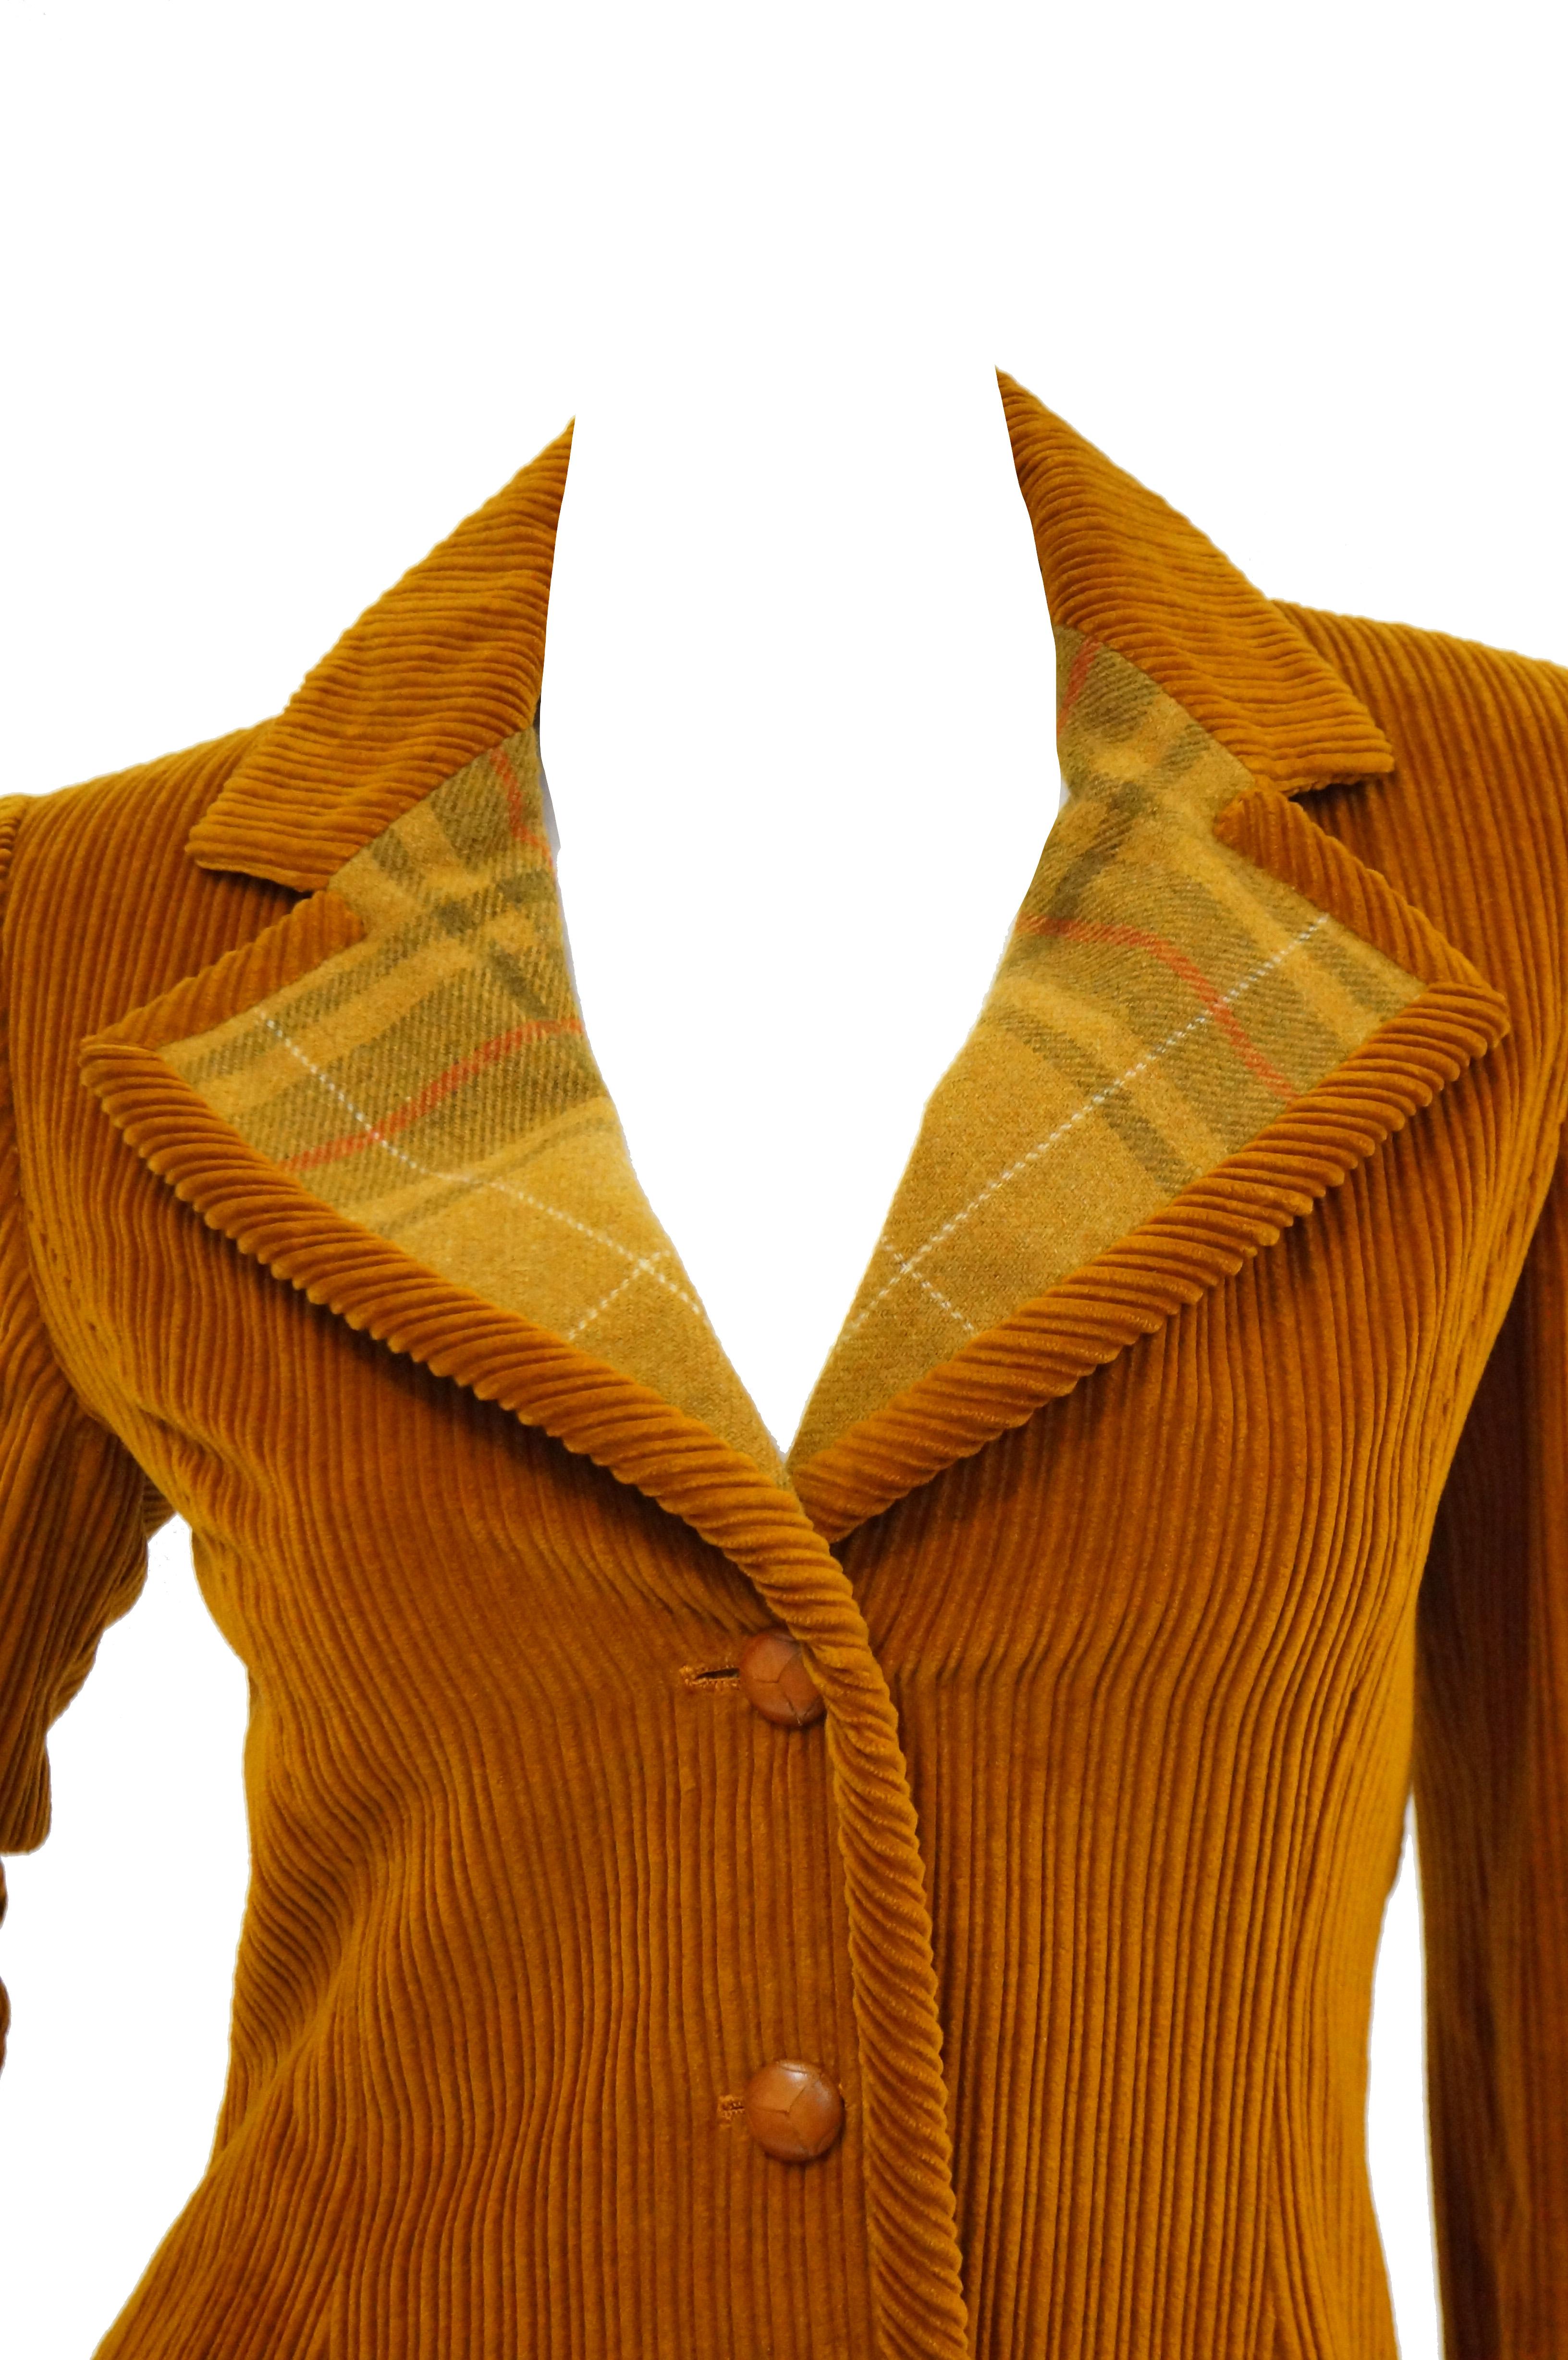 Groovy two piece suit from Bill Blass comprising of very 70s staples like heavy corduroy and golden plaid. The A - line skirt has wide box pleats and is composed of a thick gold, light olive green, and red plaid fabric. The orange corduroy blazer